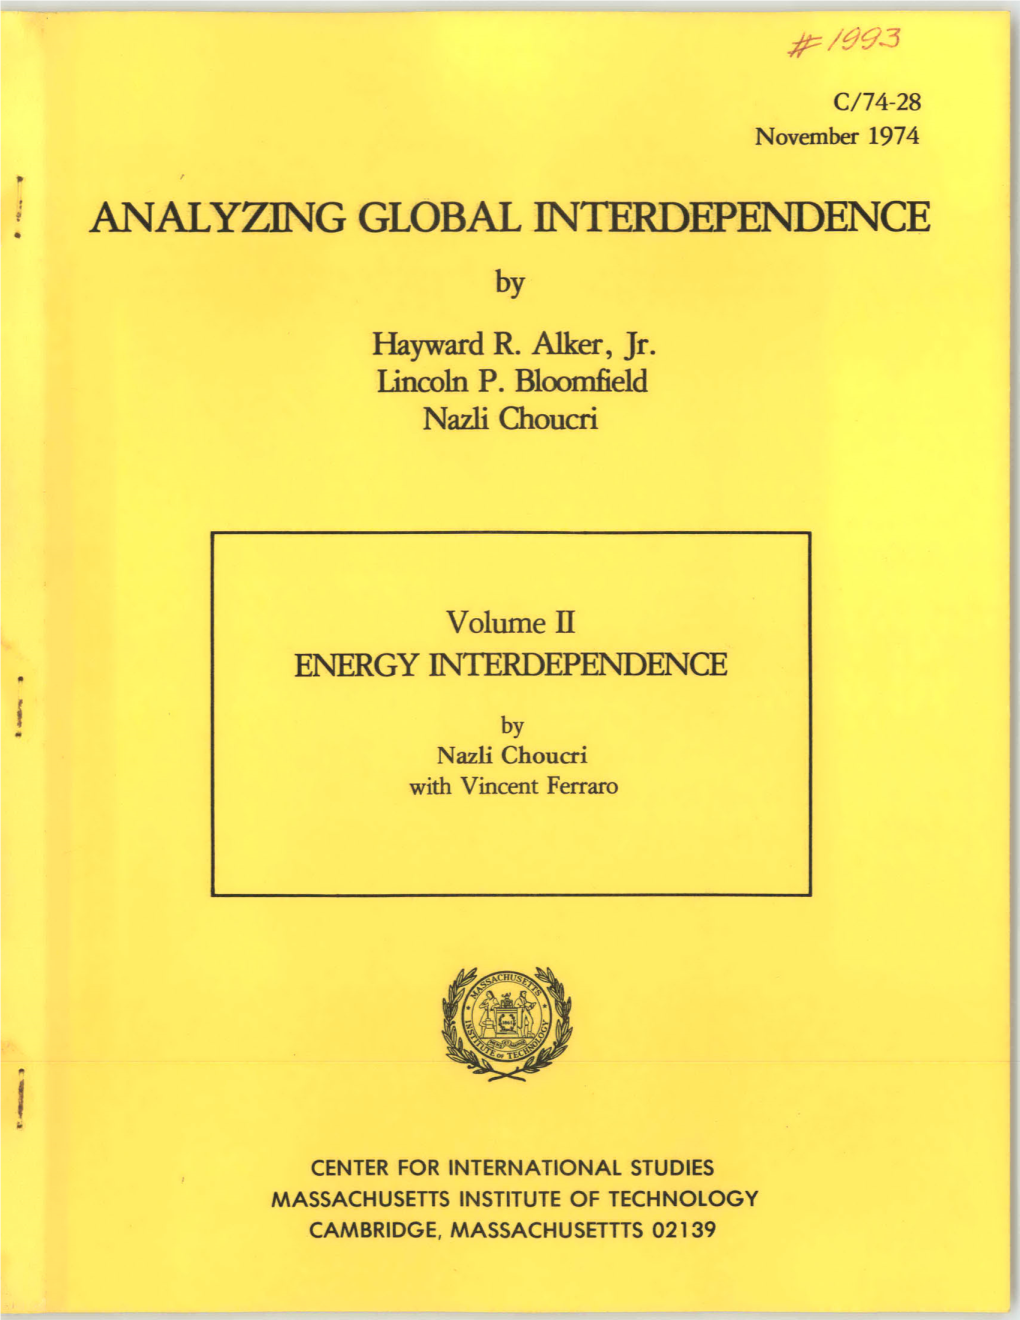 ANALYZING GLOBAL INTERDEPENDENCE by Hayward R